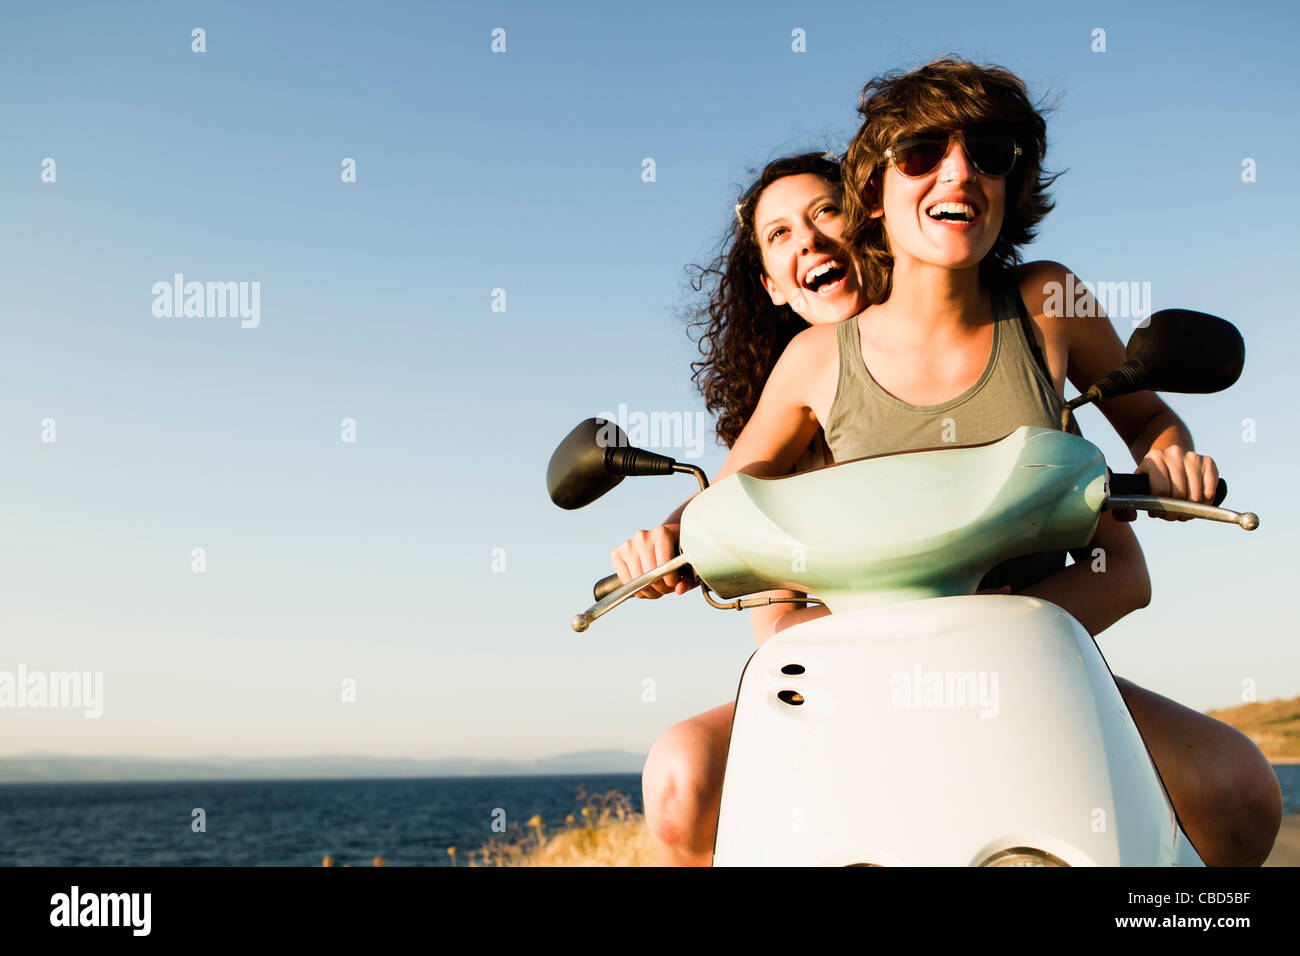 Smiling women riding scooter on beach Stock Photo